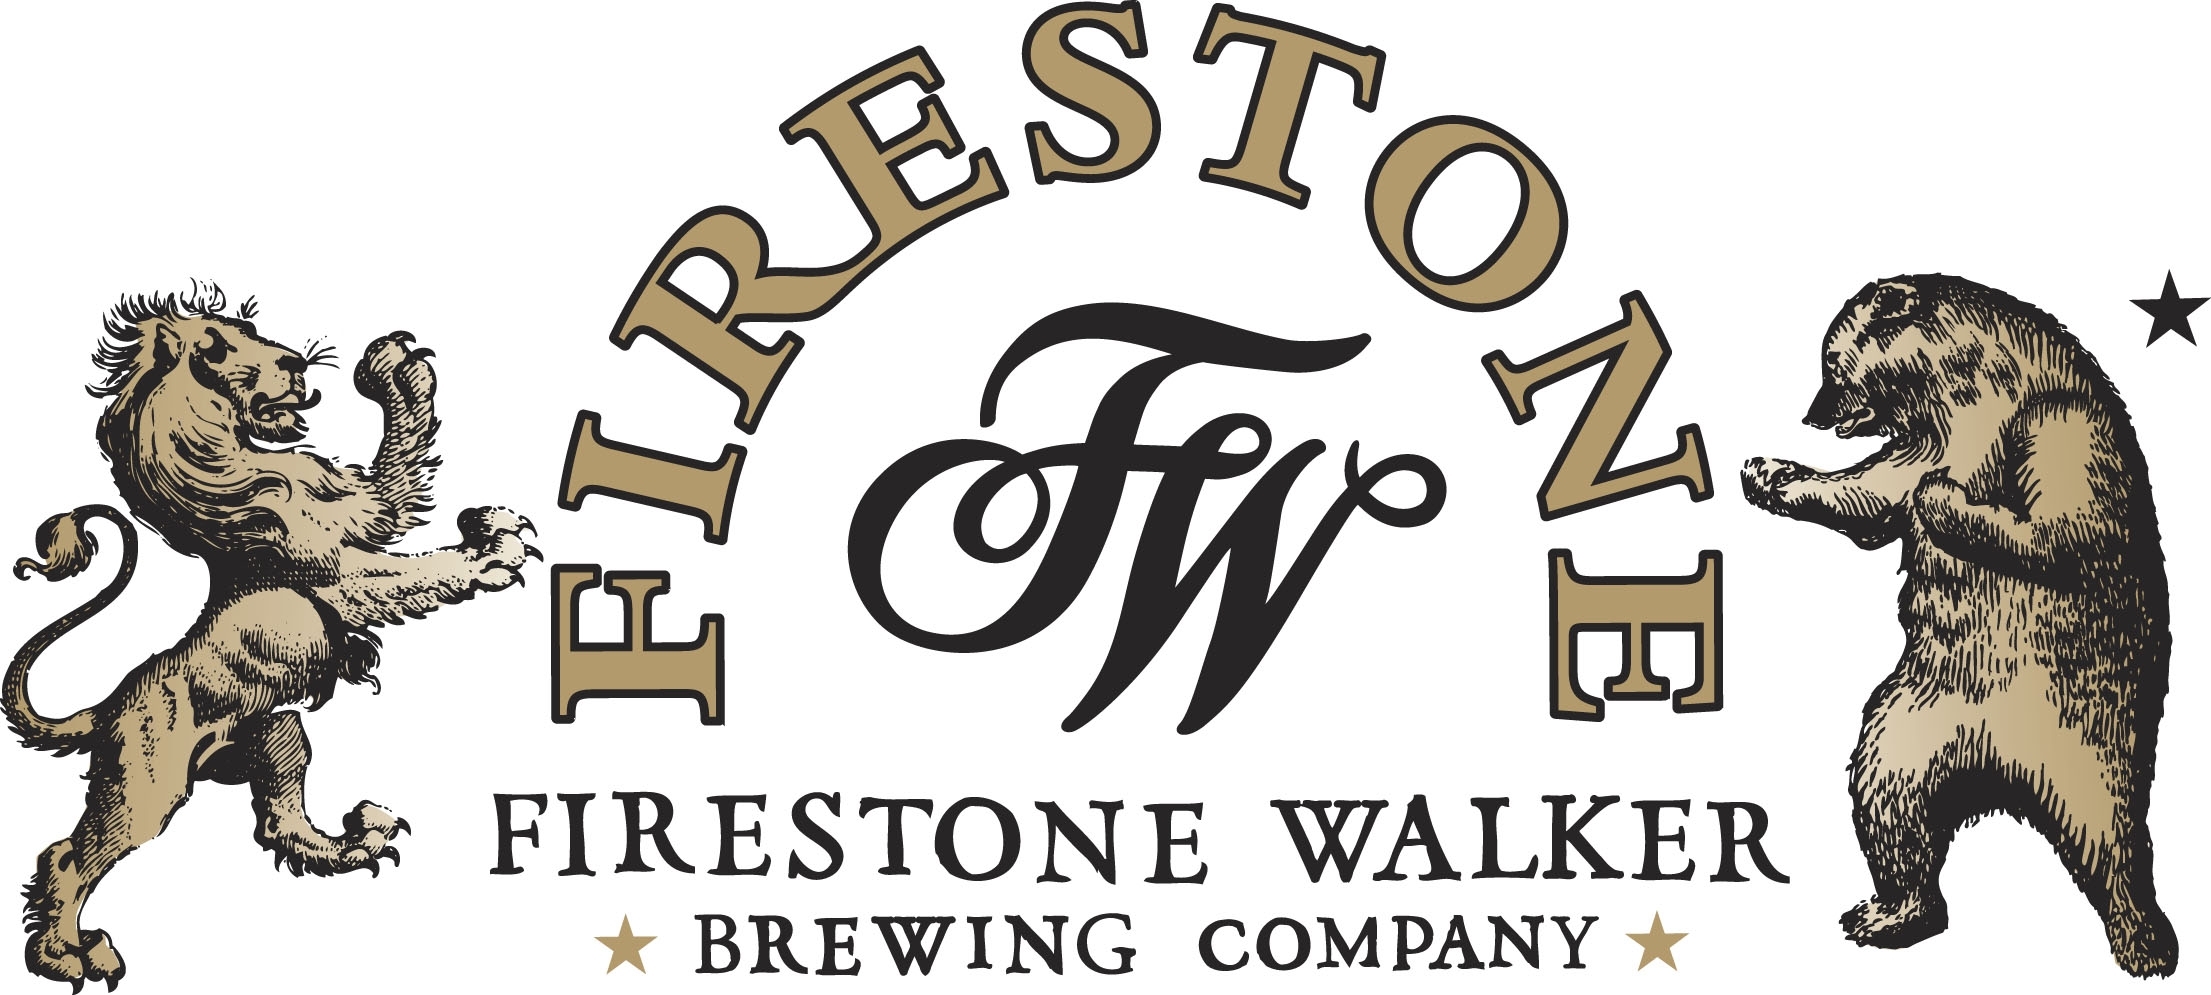 , Some Thoughts on the Firestone Walker Duvel Moortgat Bombshell Announcement